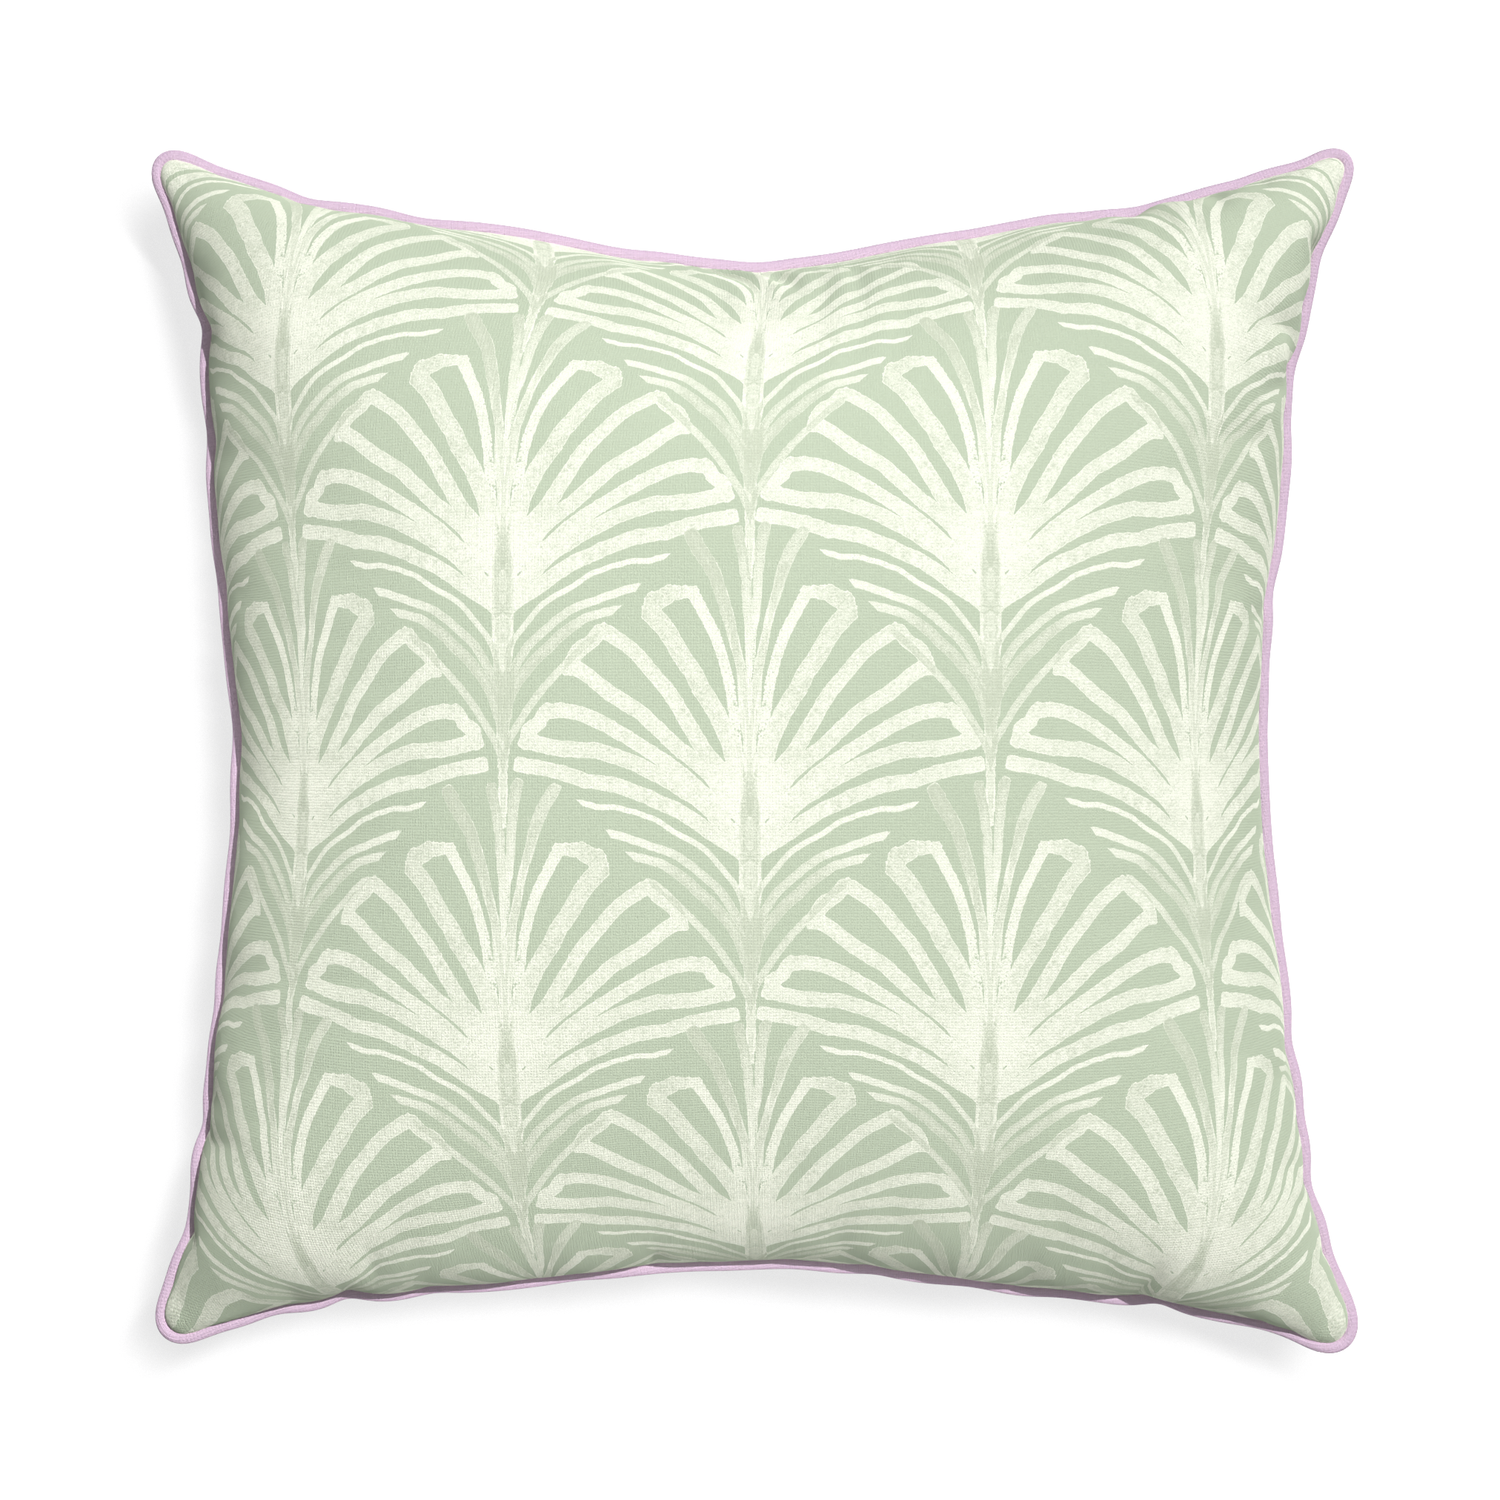 Euro-sham suzy sage custom pillow with l piping on white background